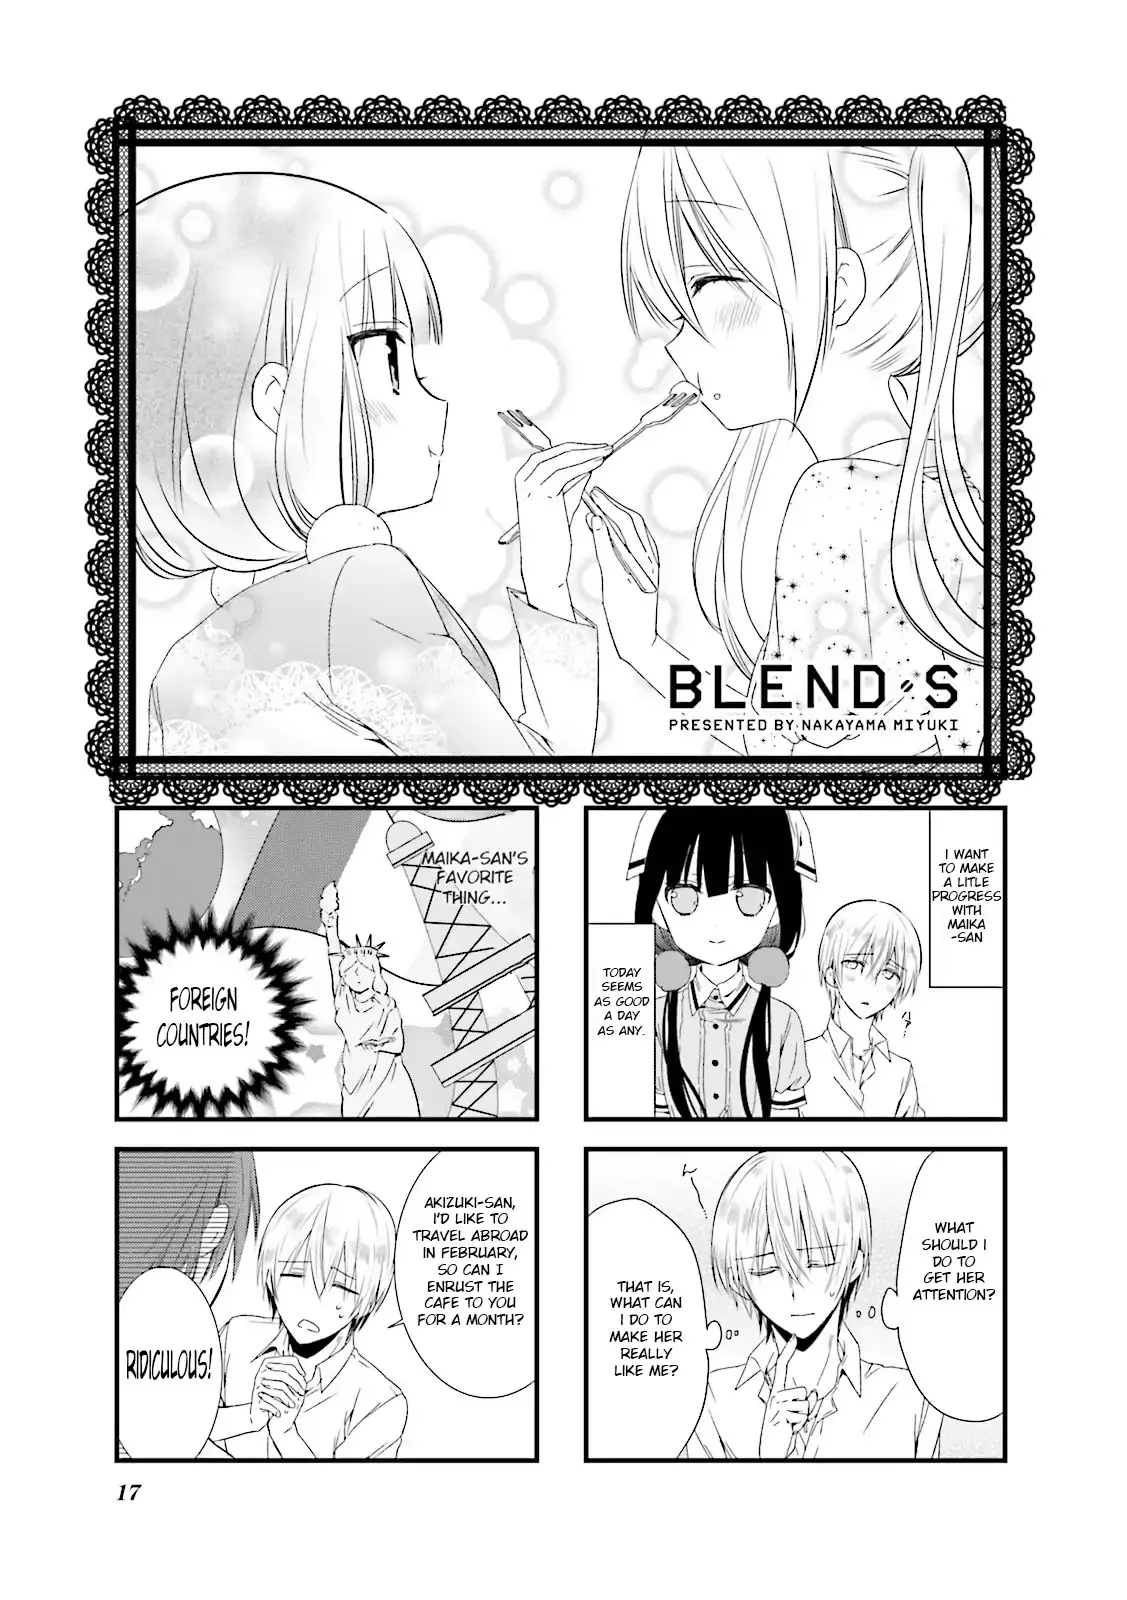 Blend S - 17 page 1